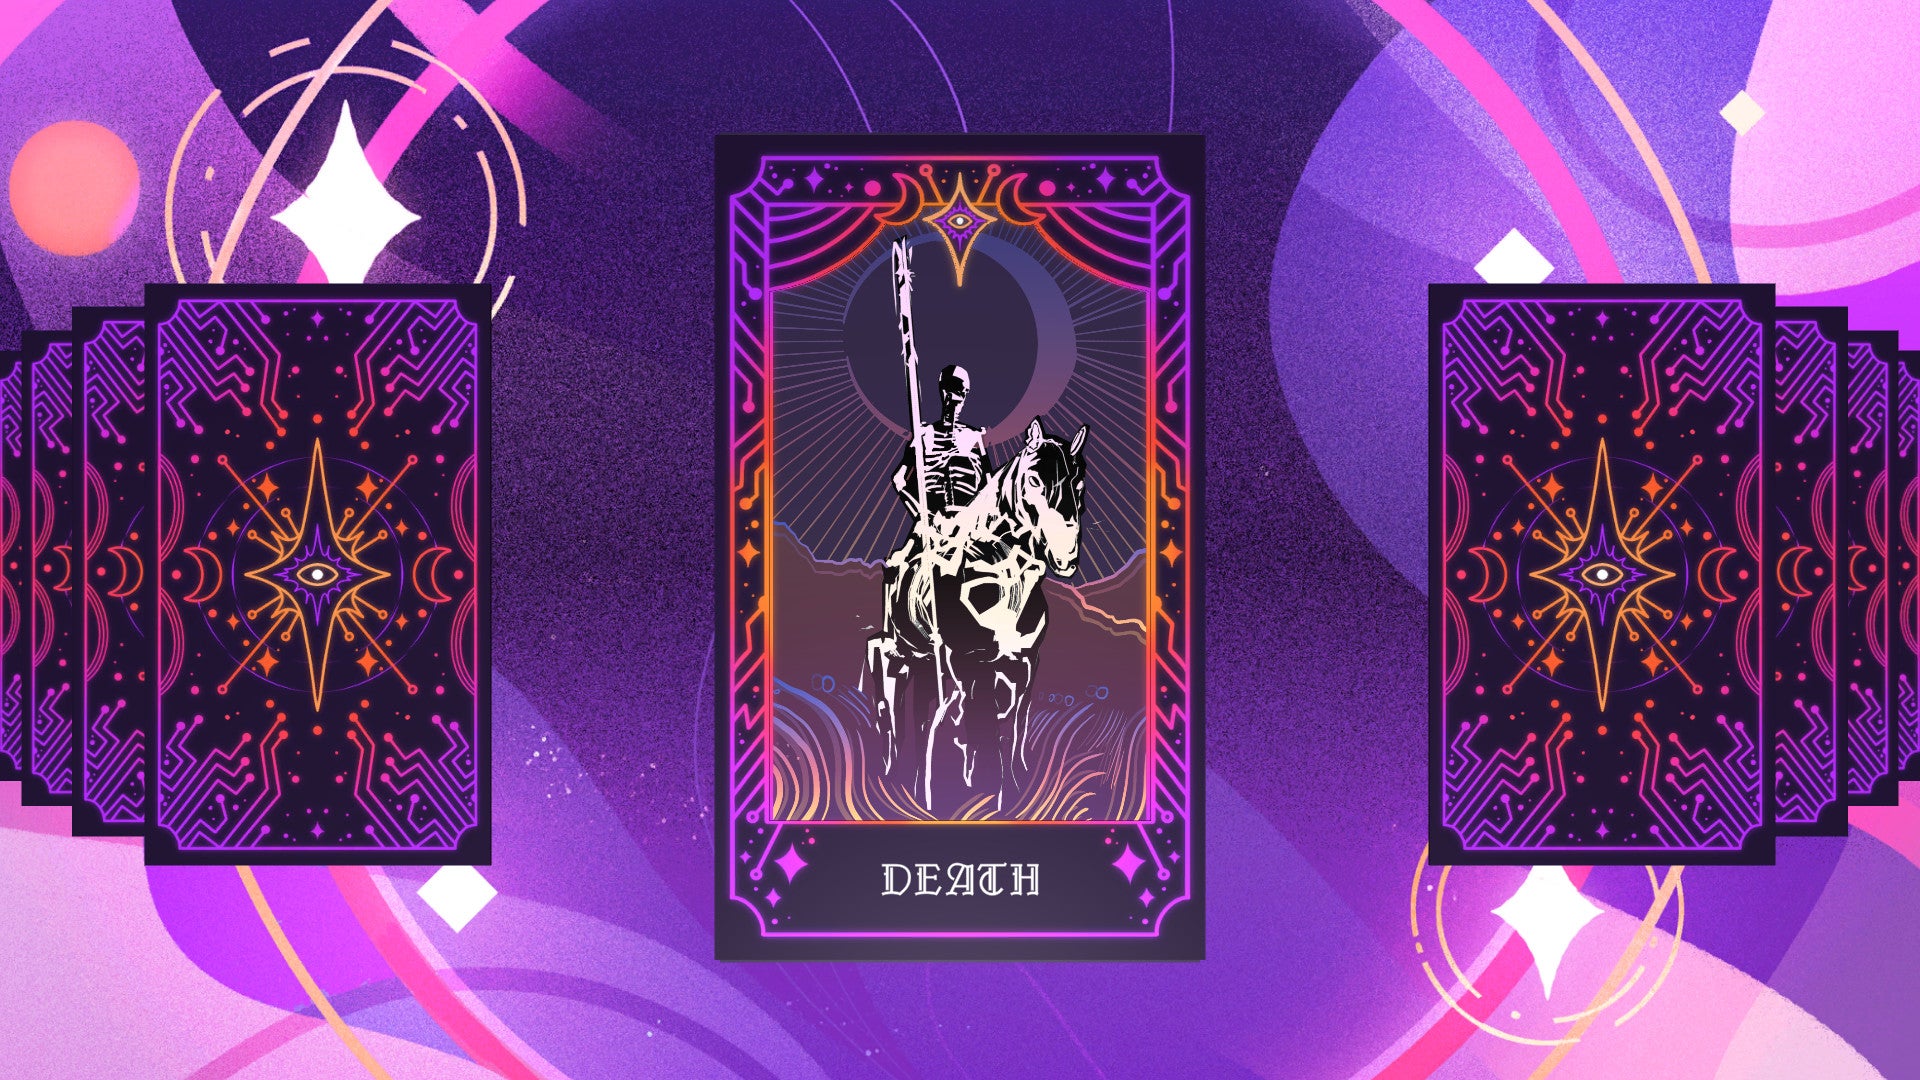 The Death card is pulled from the deck during a tarot reading in The Cartomancy Anthology.